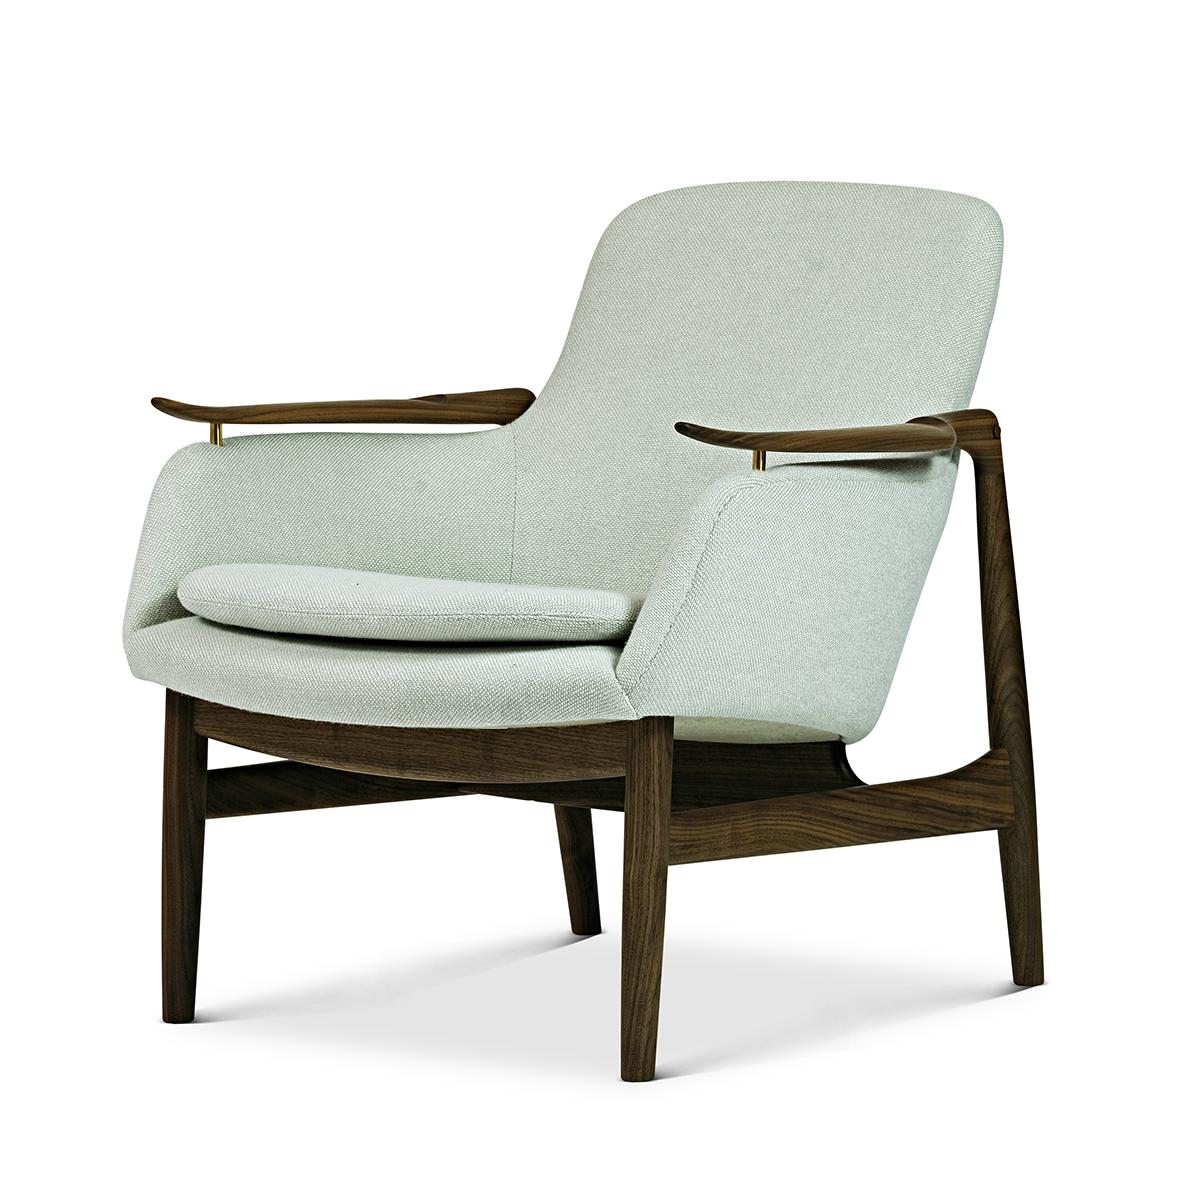 Chair designed by Finn Juhl in 1953, relaunched in 2020.
Manufactured by House of Finn Juhl in Denmark.

The FJ 53 is an extravagant piece of furniture. It integrates the lightness and elegance of a wooden chair with an upholstered corpus, to